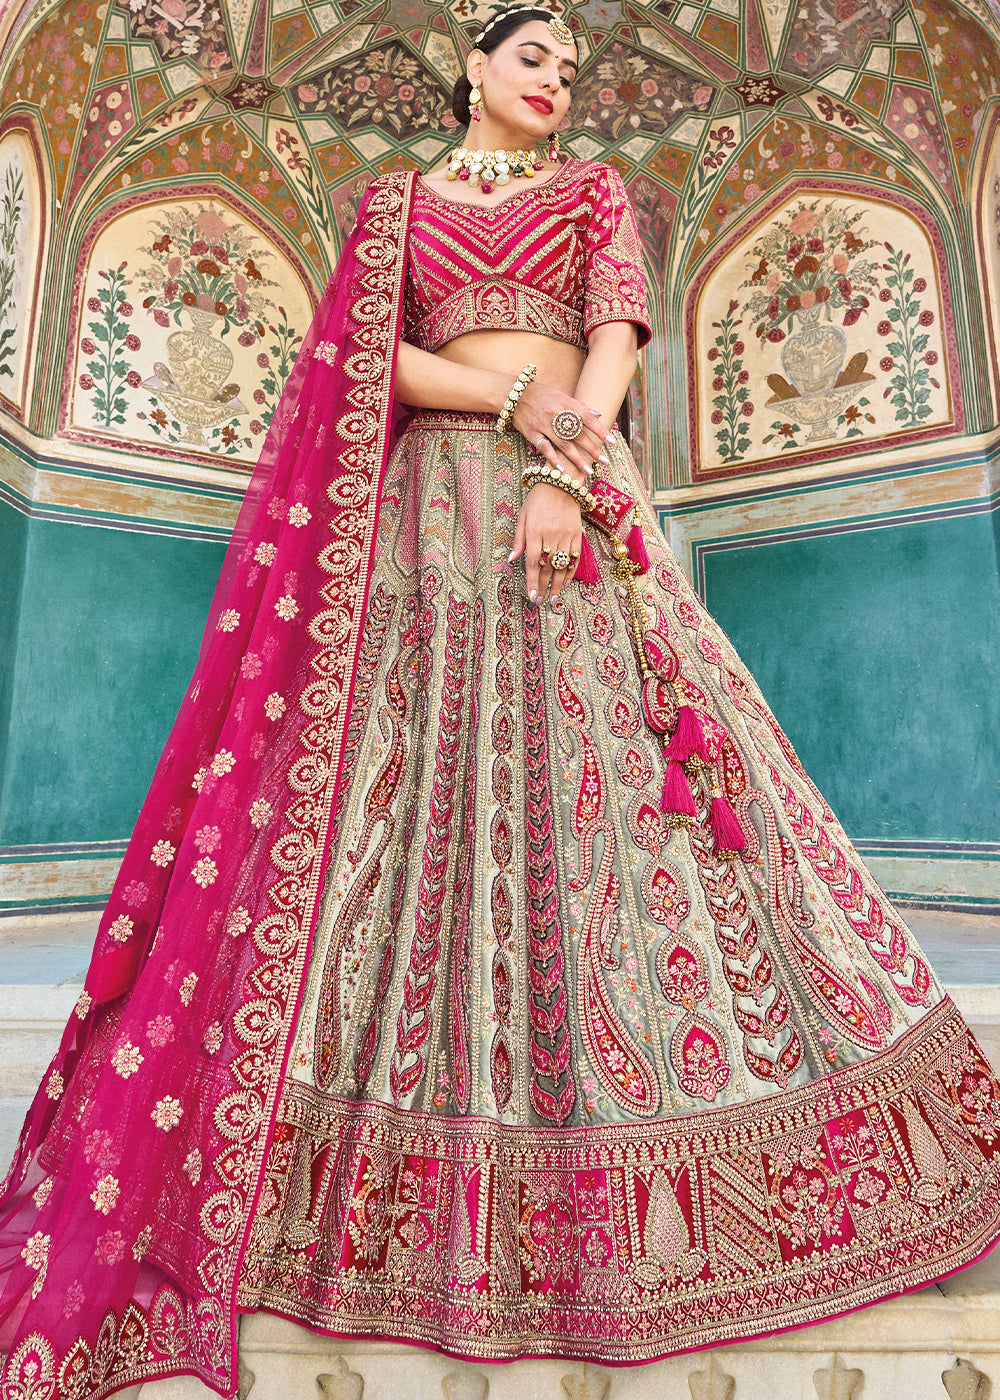 Tea-Green Bridal Lehenga Choli with Hand-Embroidered Beads and Sequins |  Exotic India Art